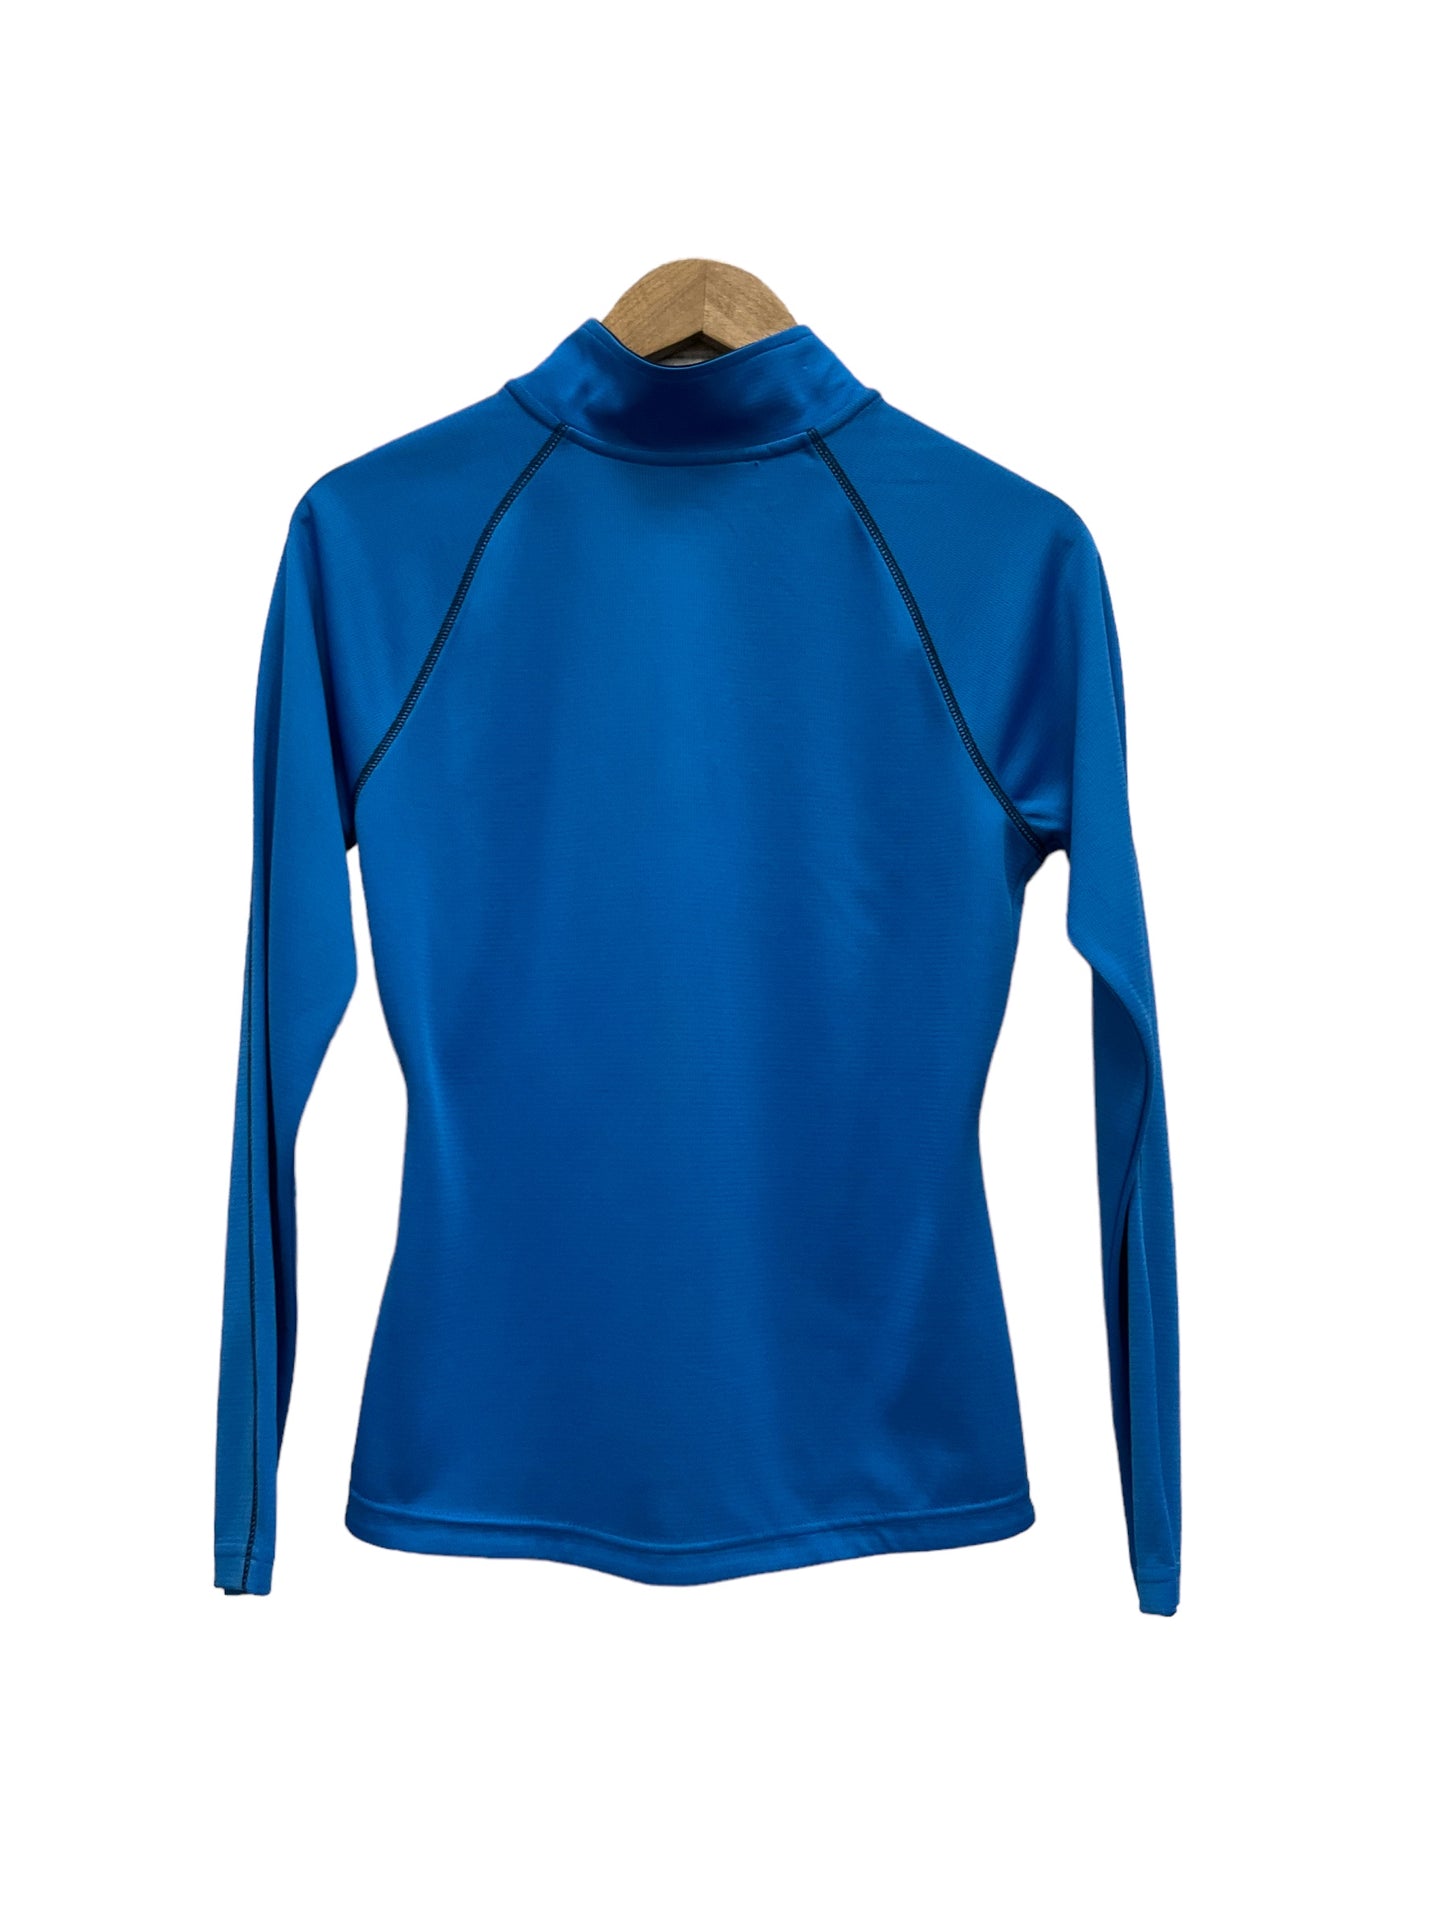 Athletic Top Short Sleeve By Danskin Now  Size: L